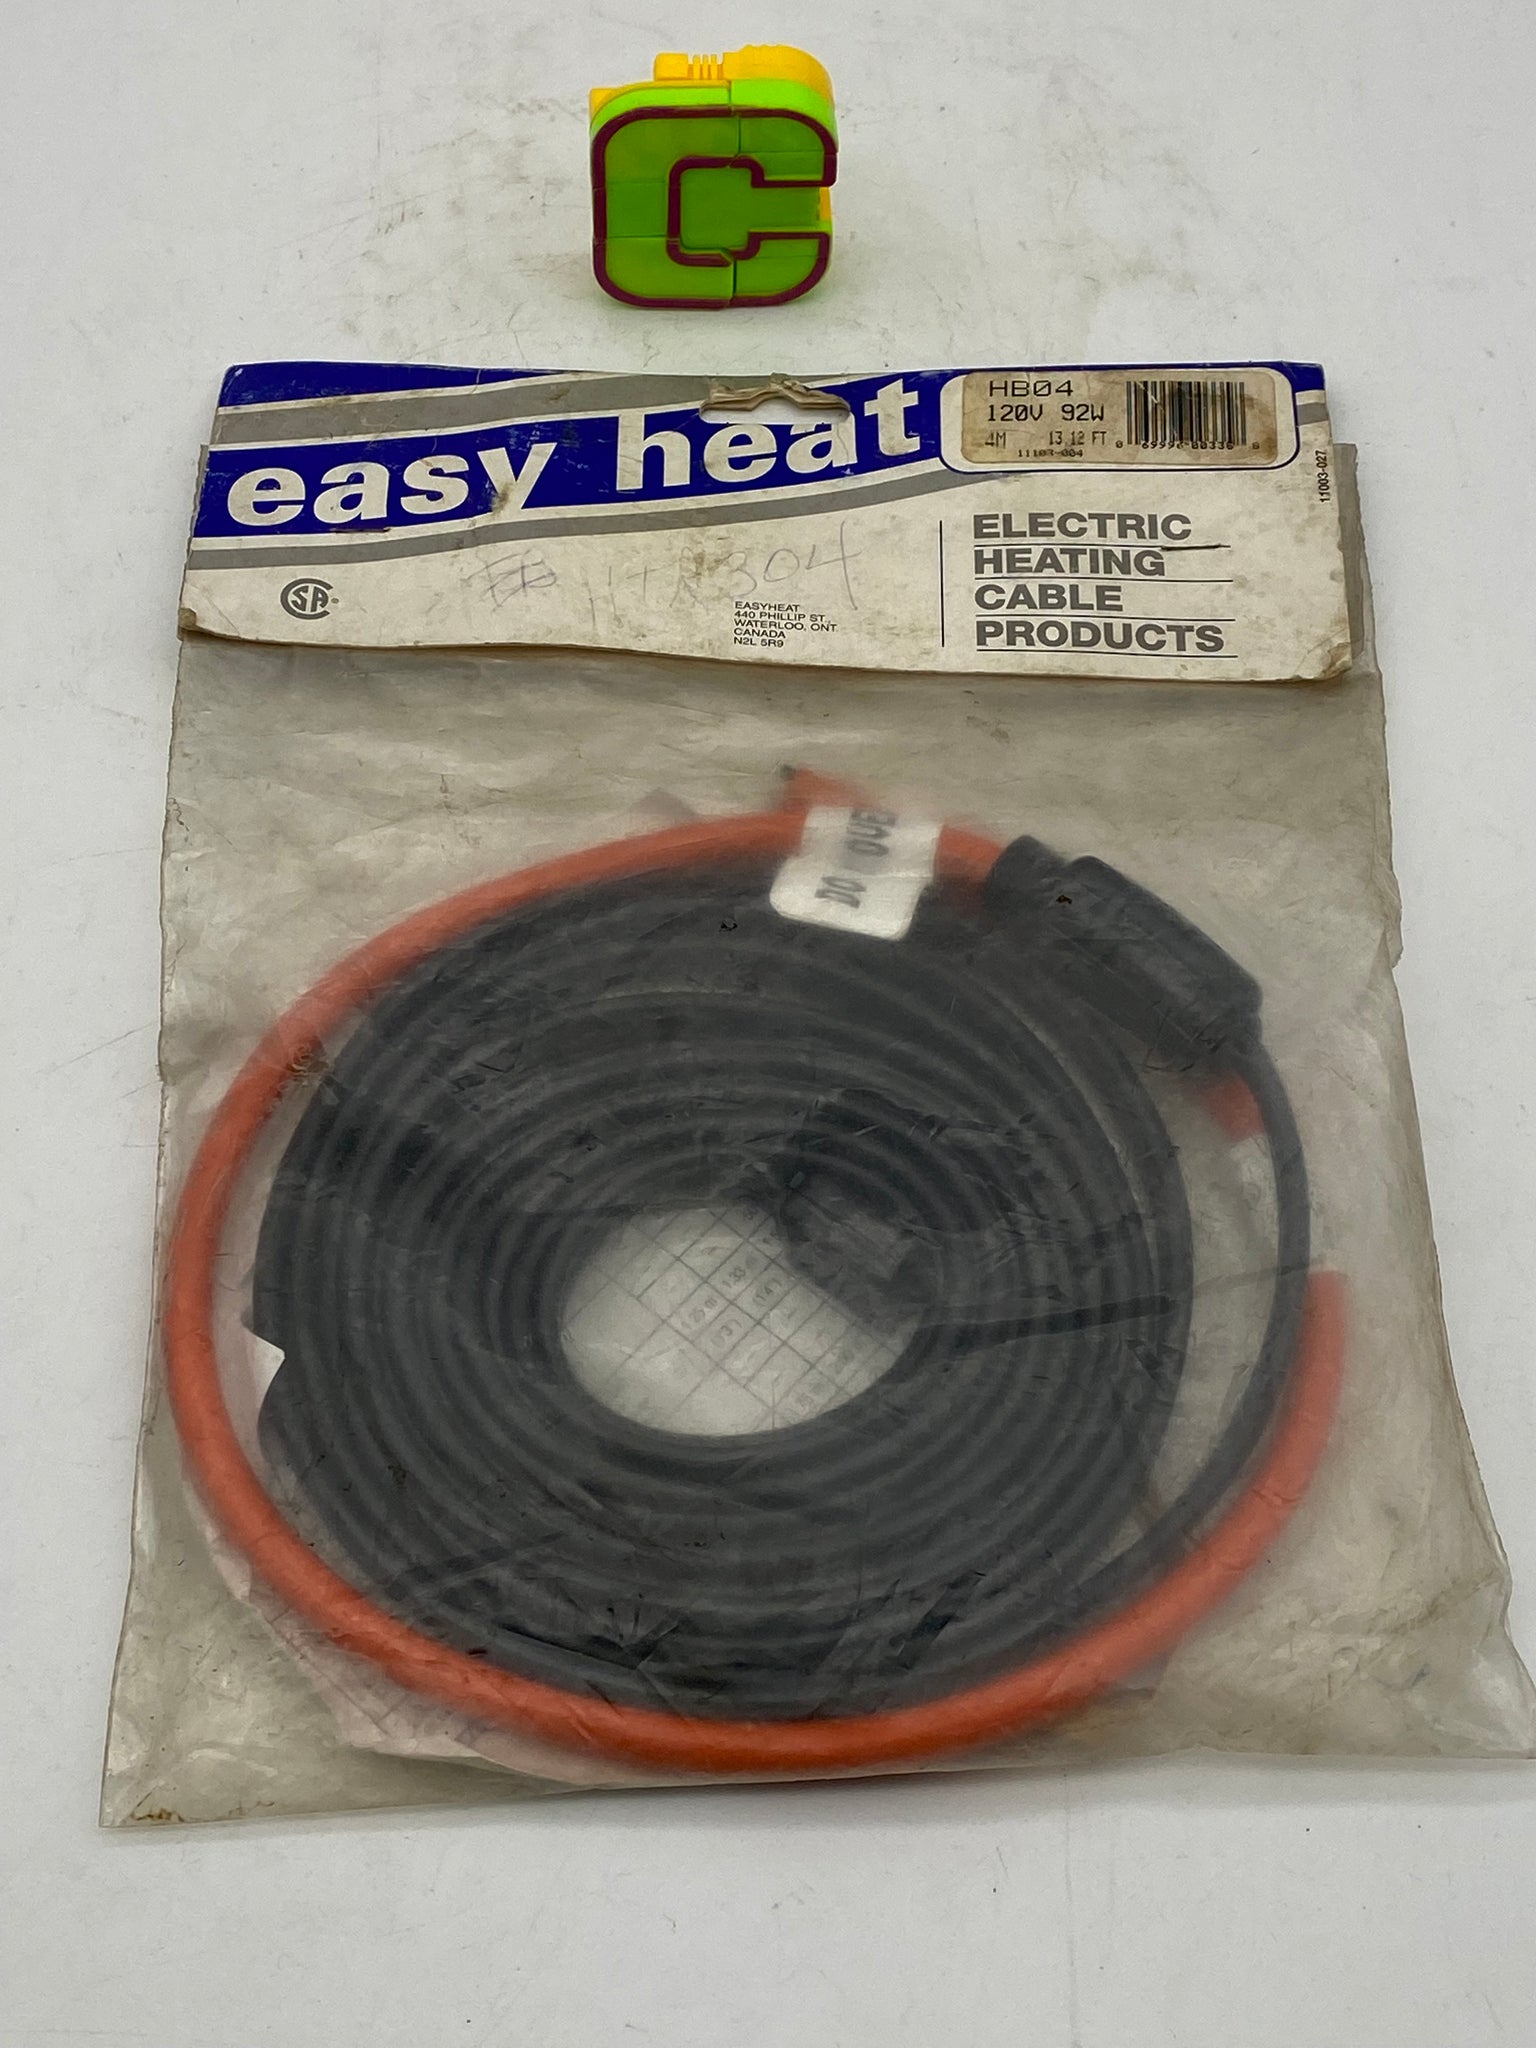 Easy Heat HBO4 Electric Heating Cable (New) – Gulf Asset Recovery